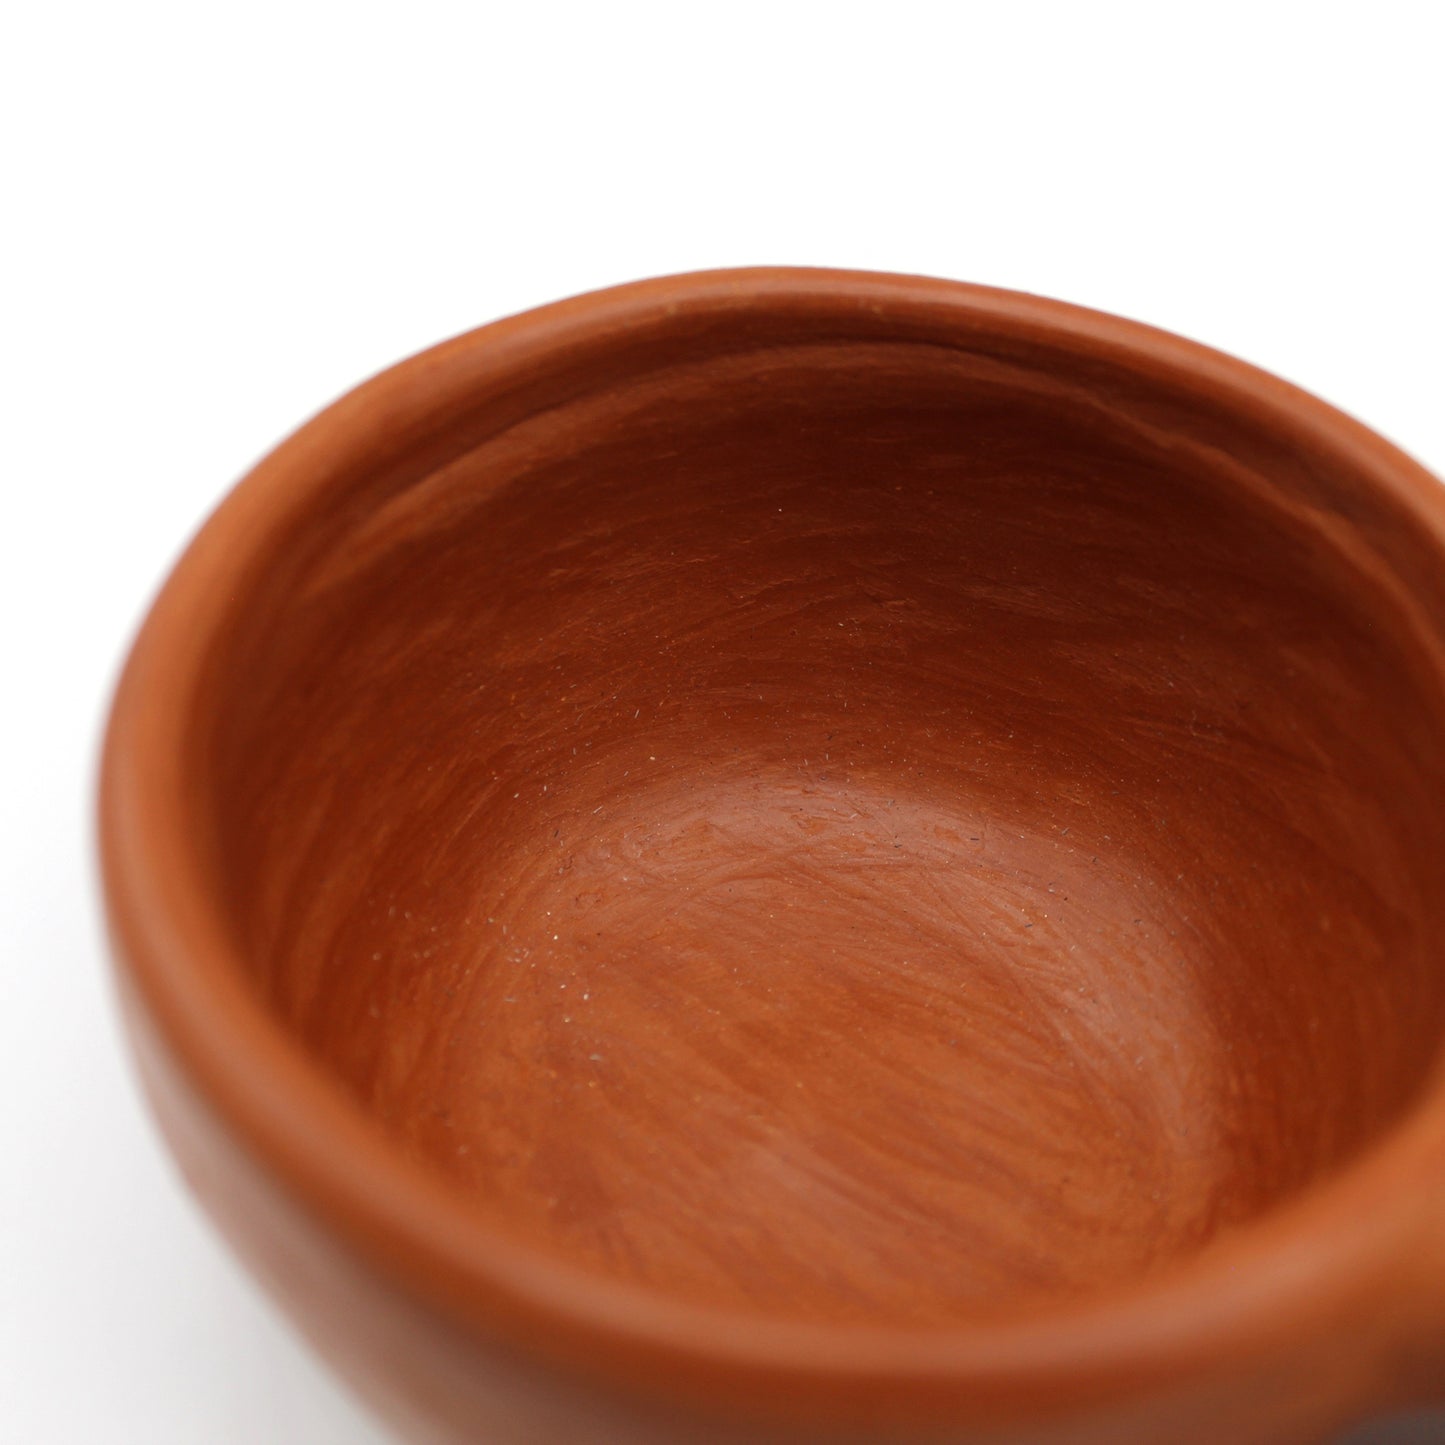 Terracotta Salsa Bowl 3 in one - set of 2